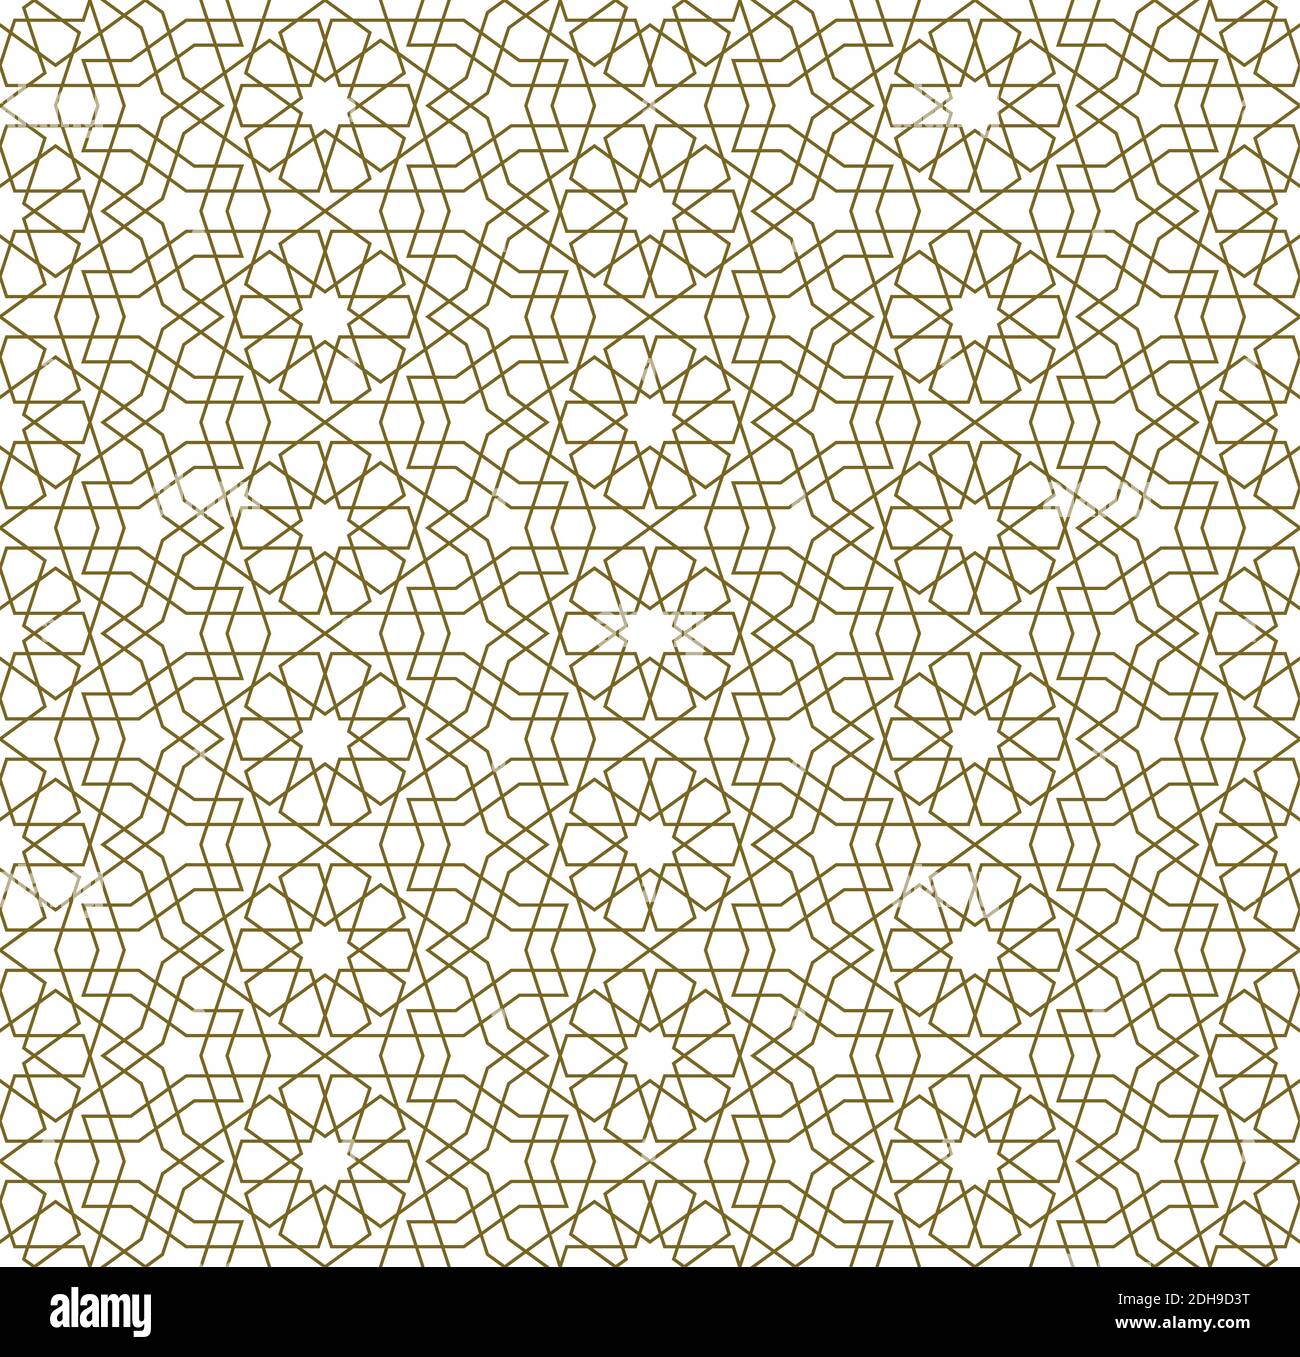 Background seamless pattern based on traditional islamic art.Brown color.Great design for fabric,textile,cover,wrapping paper,background.Average thick Stock Vector